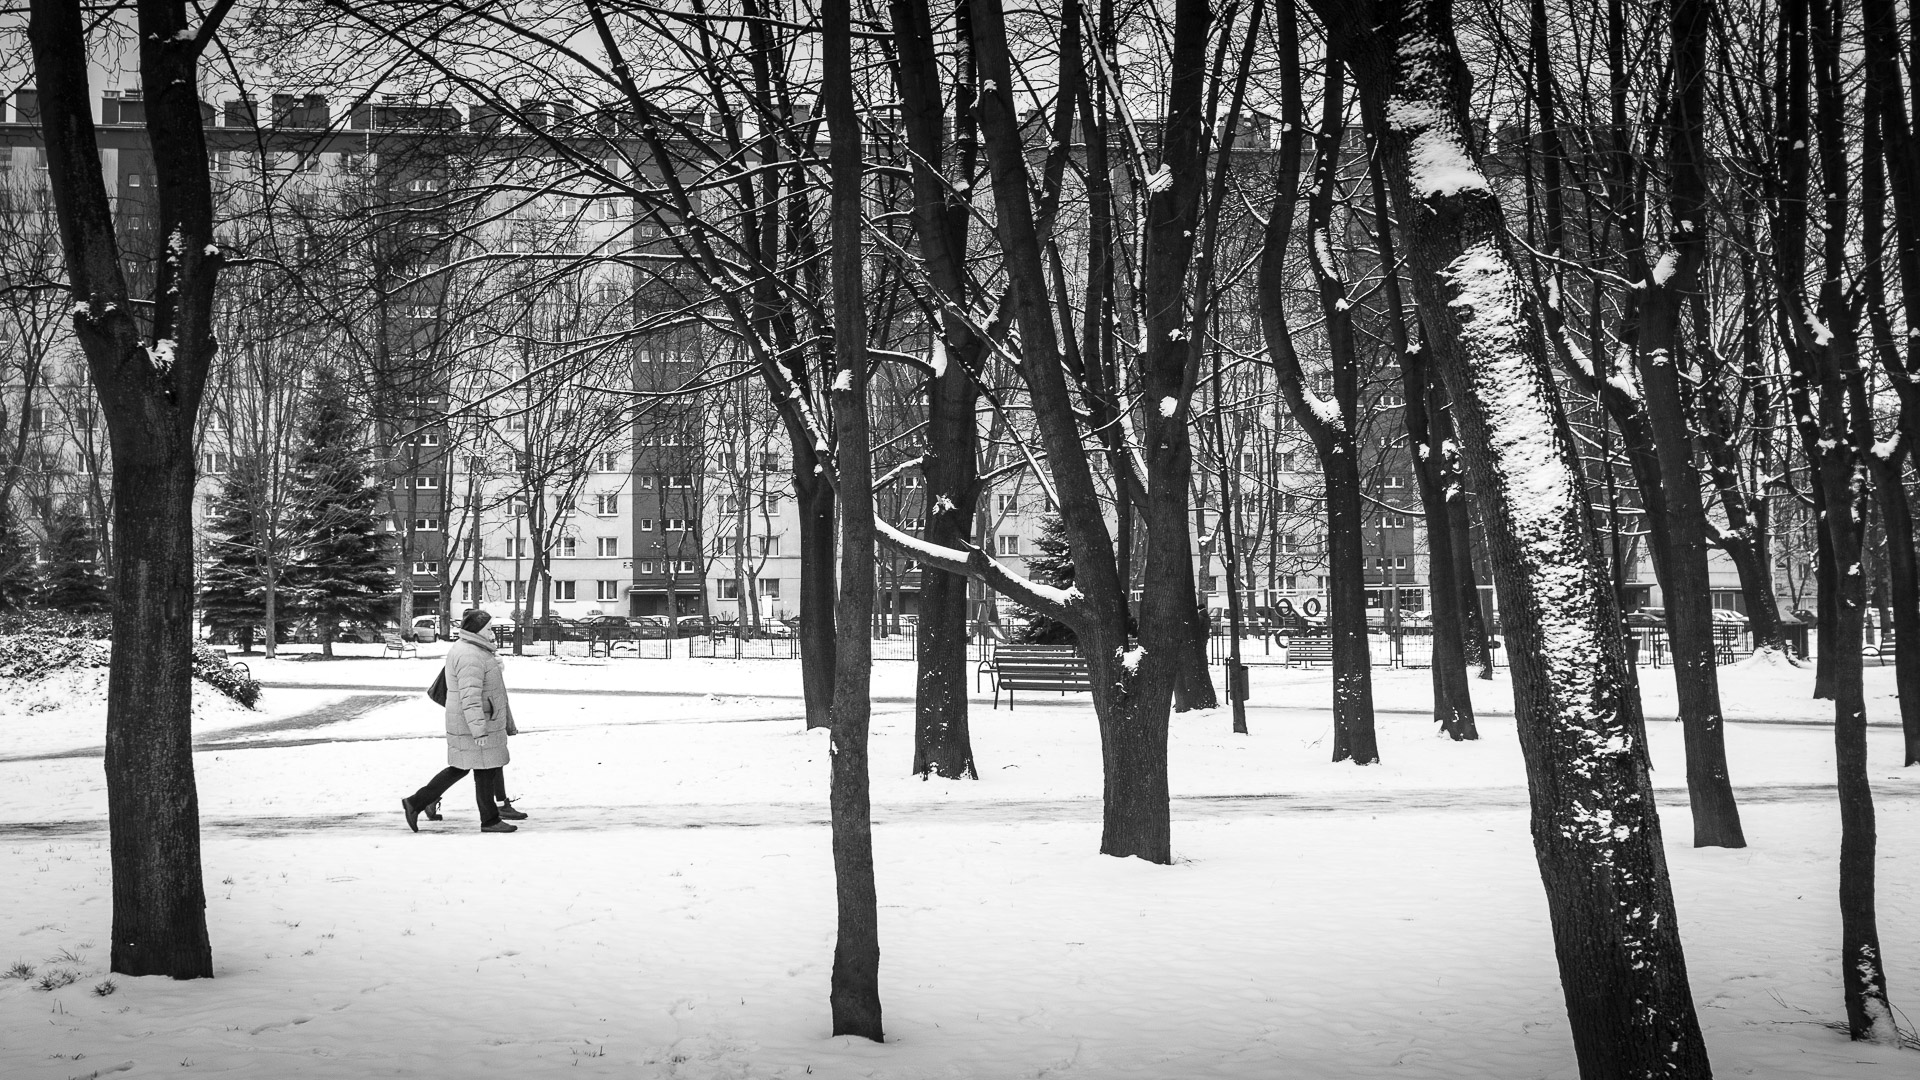 Snow covers the ground outside the apartment blocks of Nowa Huta. 